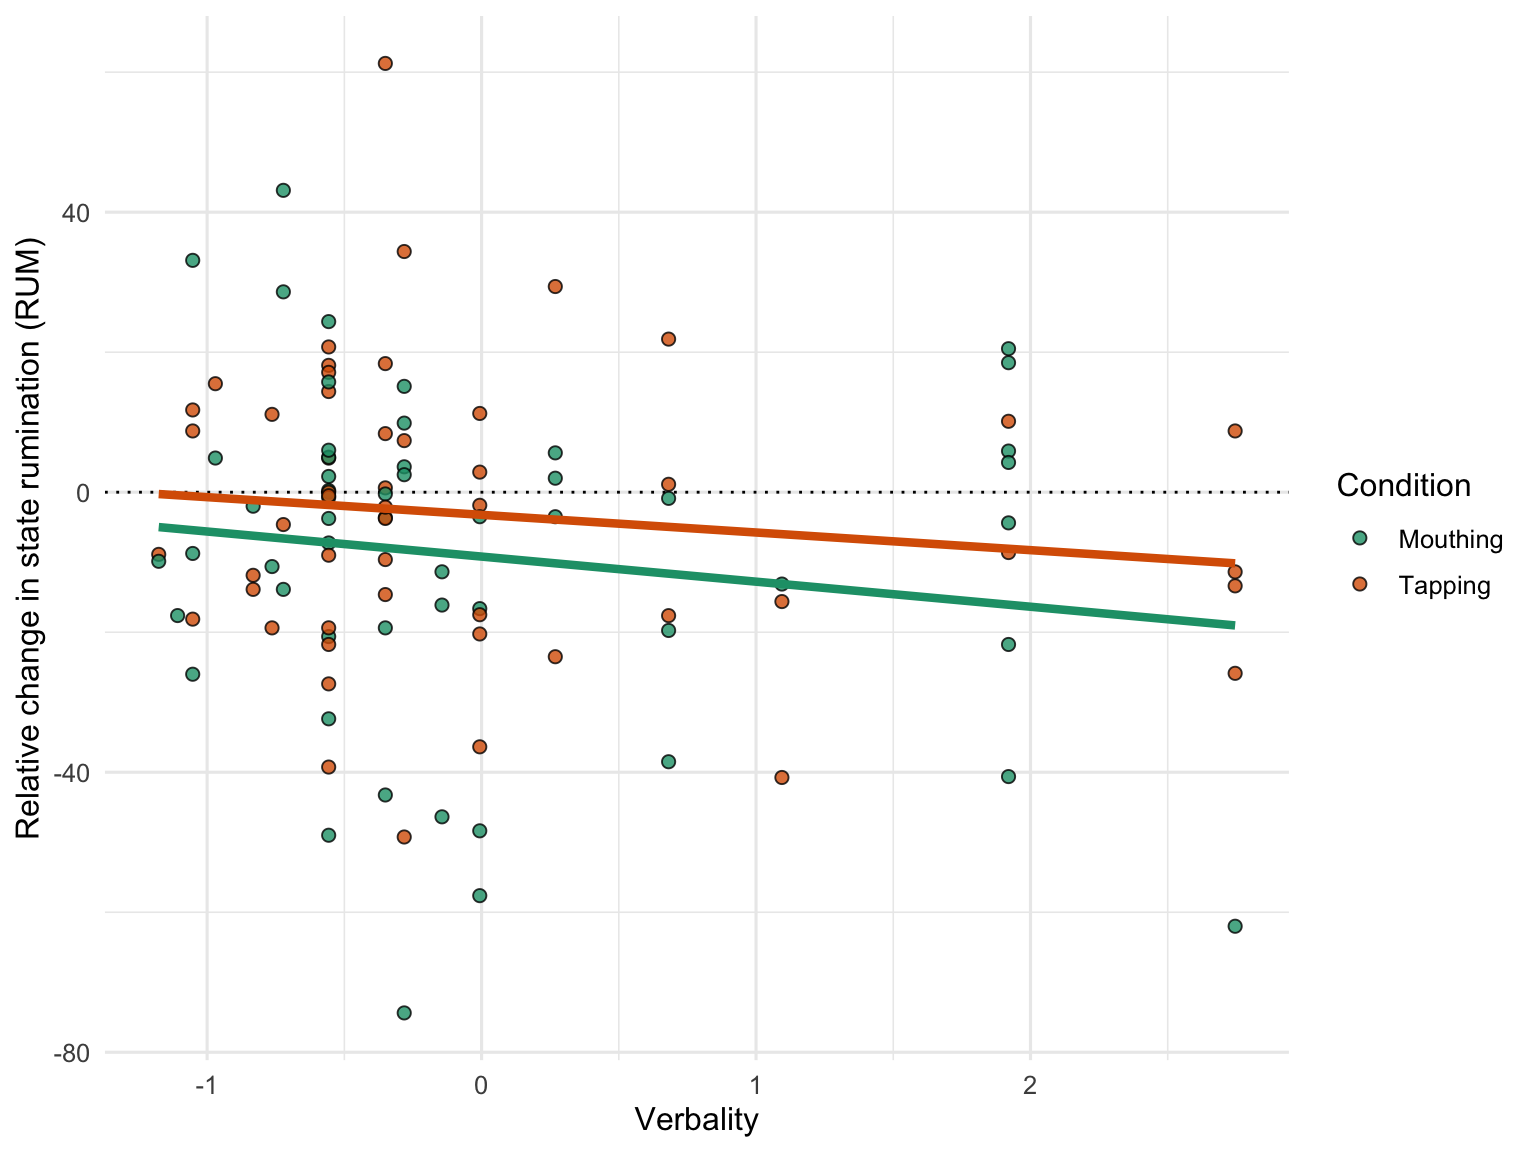 Mean RUM relative change after motor activity, as a function of the degree of Verbality, in the mouthing (the green dots and regression line) and finger tapping (the orange dots and regression line) conditions.